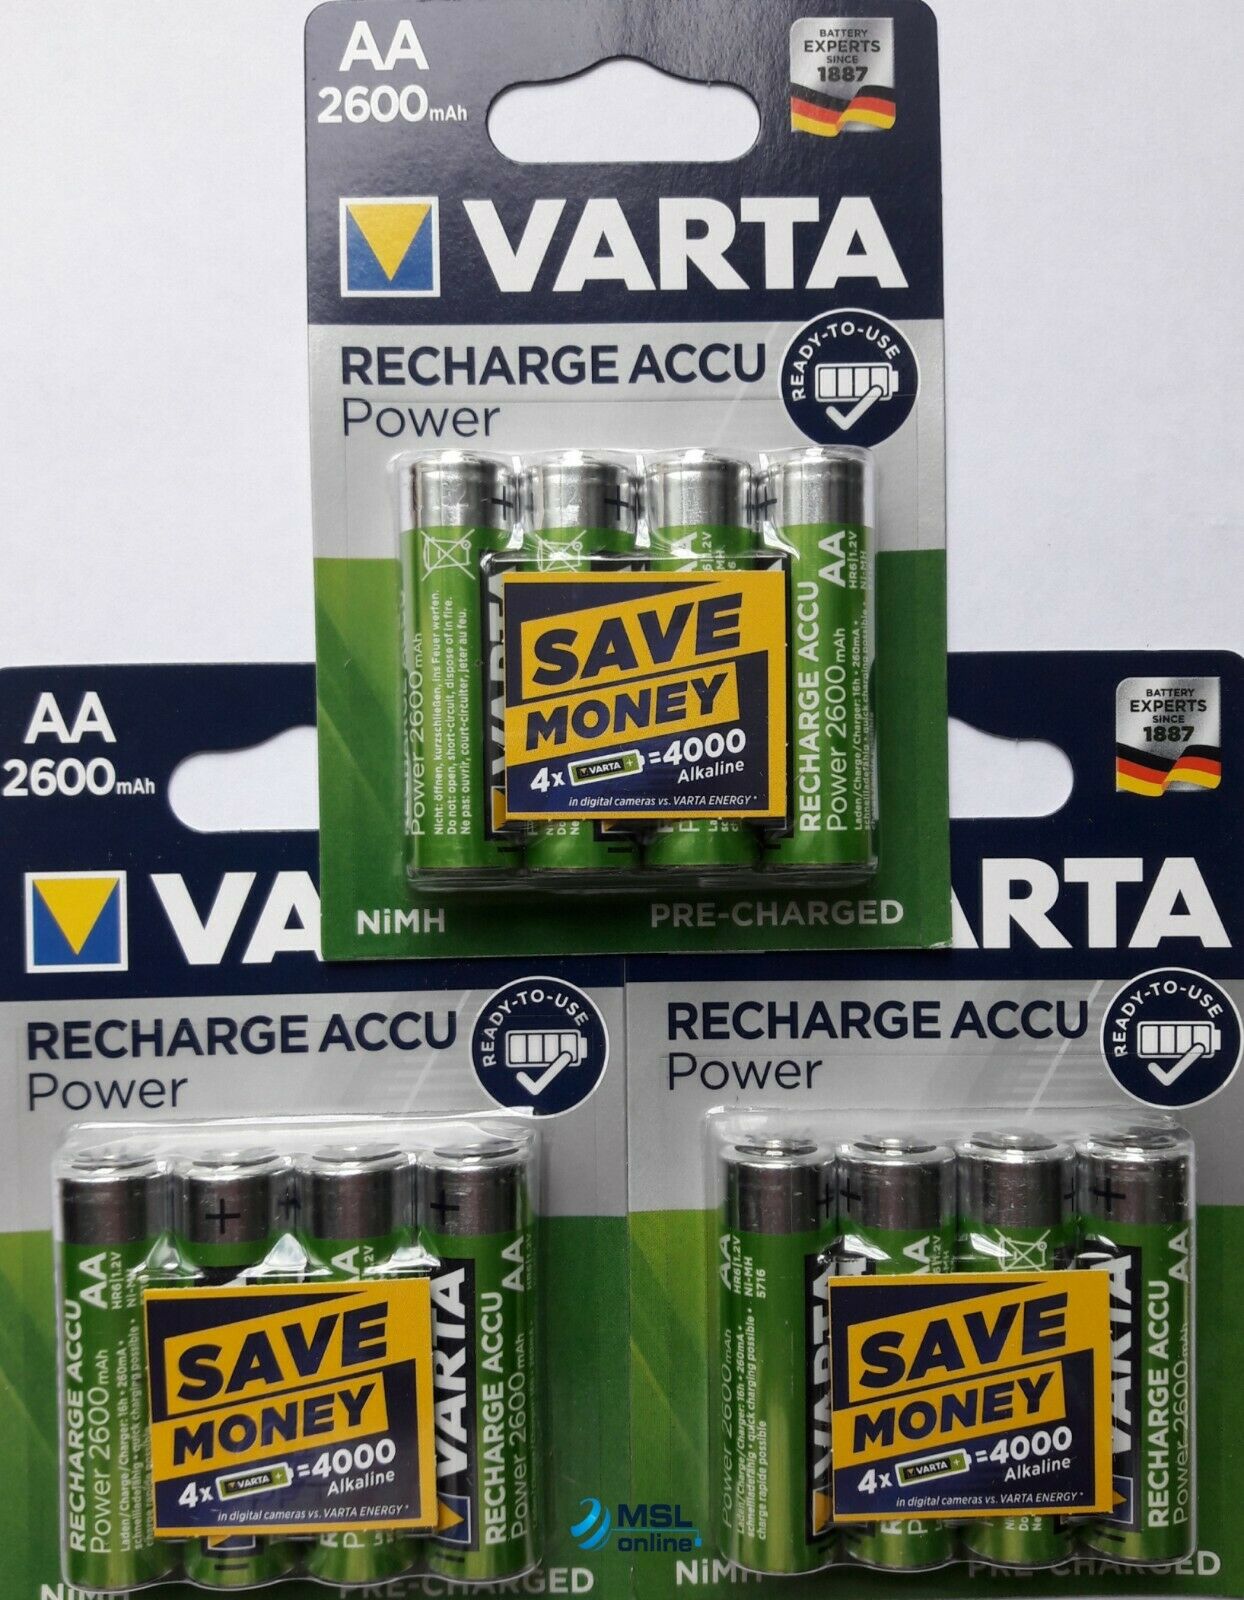 4 x VARTA AA Ni-MH 2600 mAh Rechargeable Batteries Pre Charged R6 LR6 HR6 